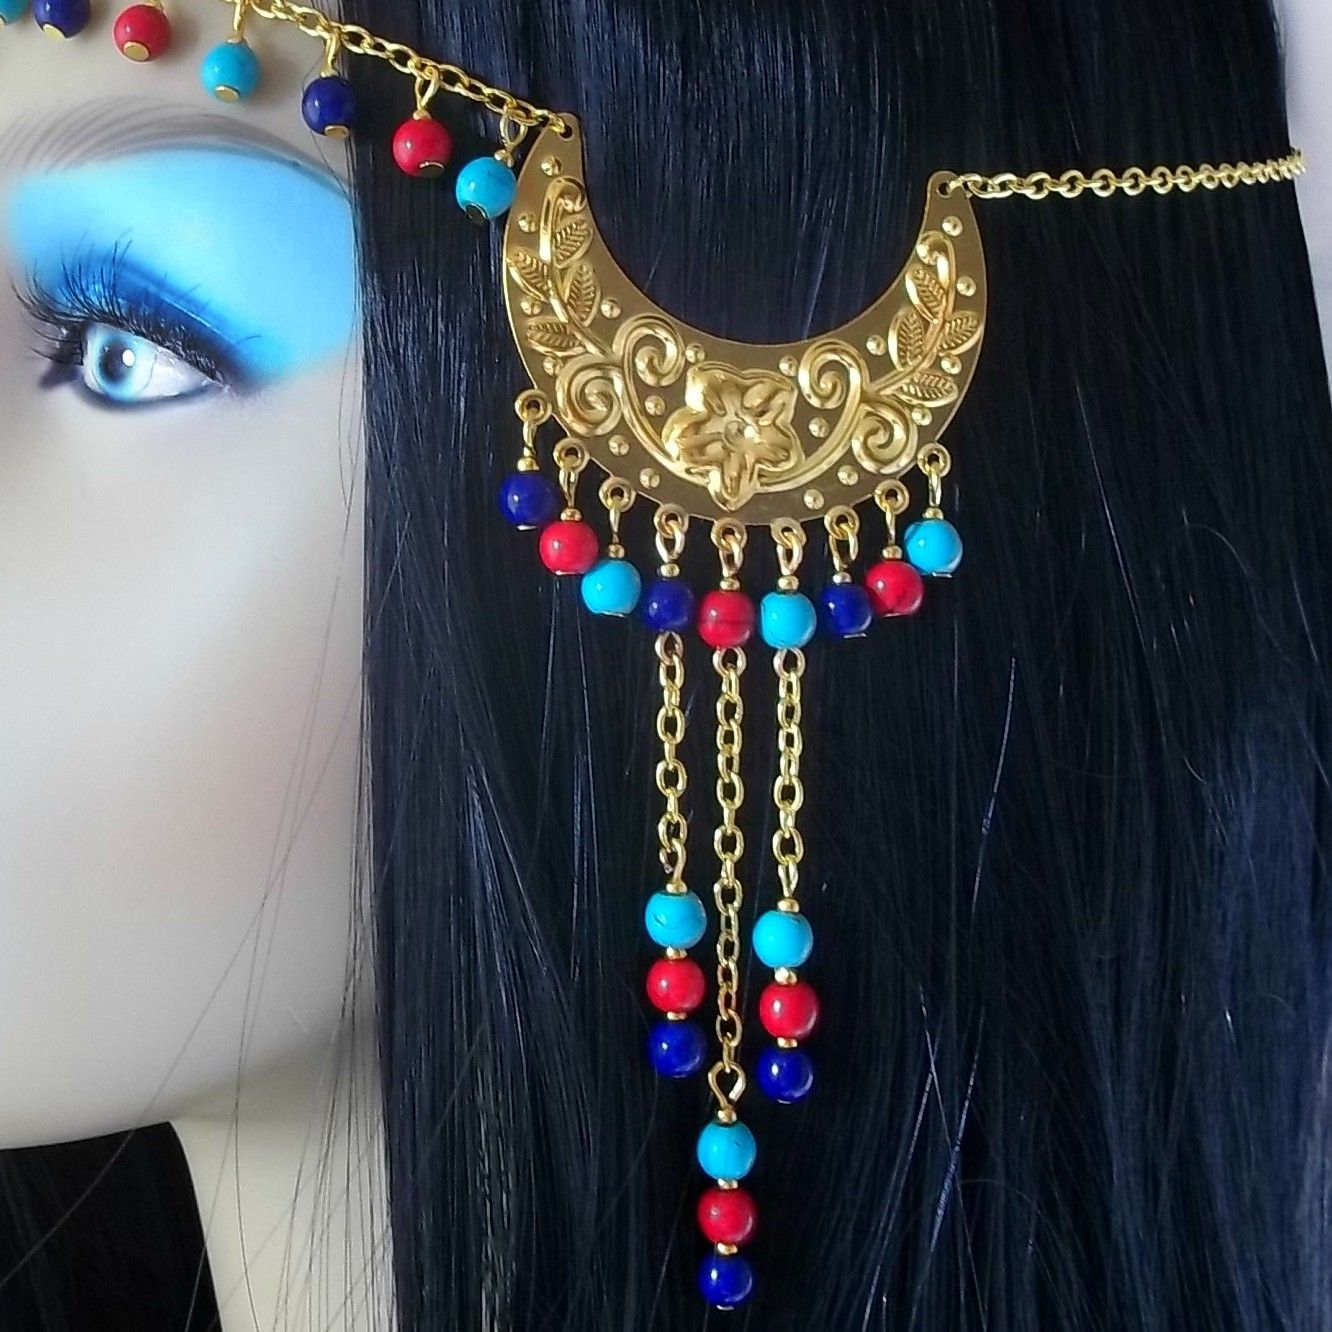 Egyptian Costume Headdresses, Crowns, Necklaces, Bracelets, Earrings, Jewellery, Hand Chains, Ankhs, Belts & Accessories